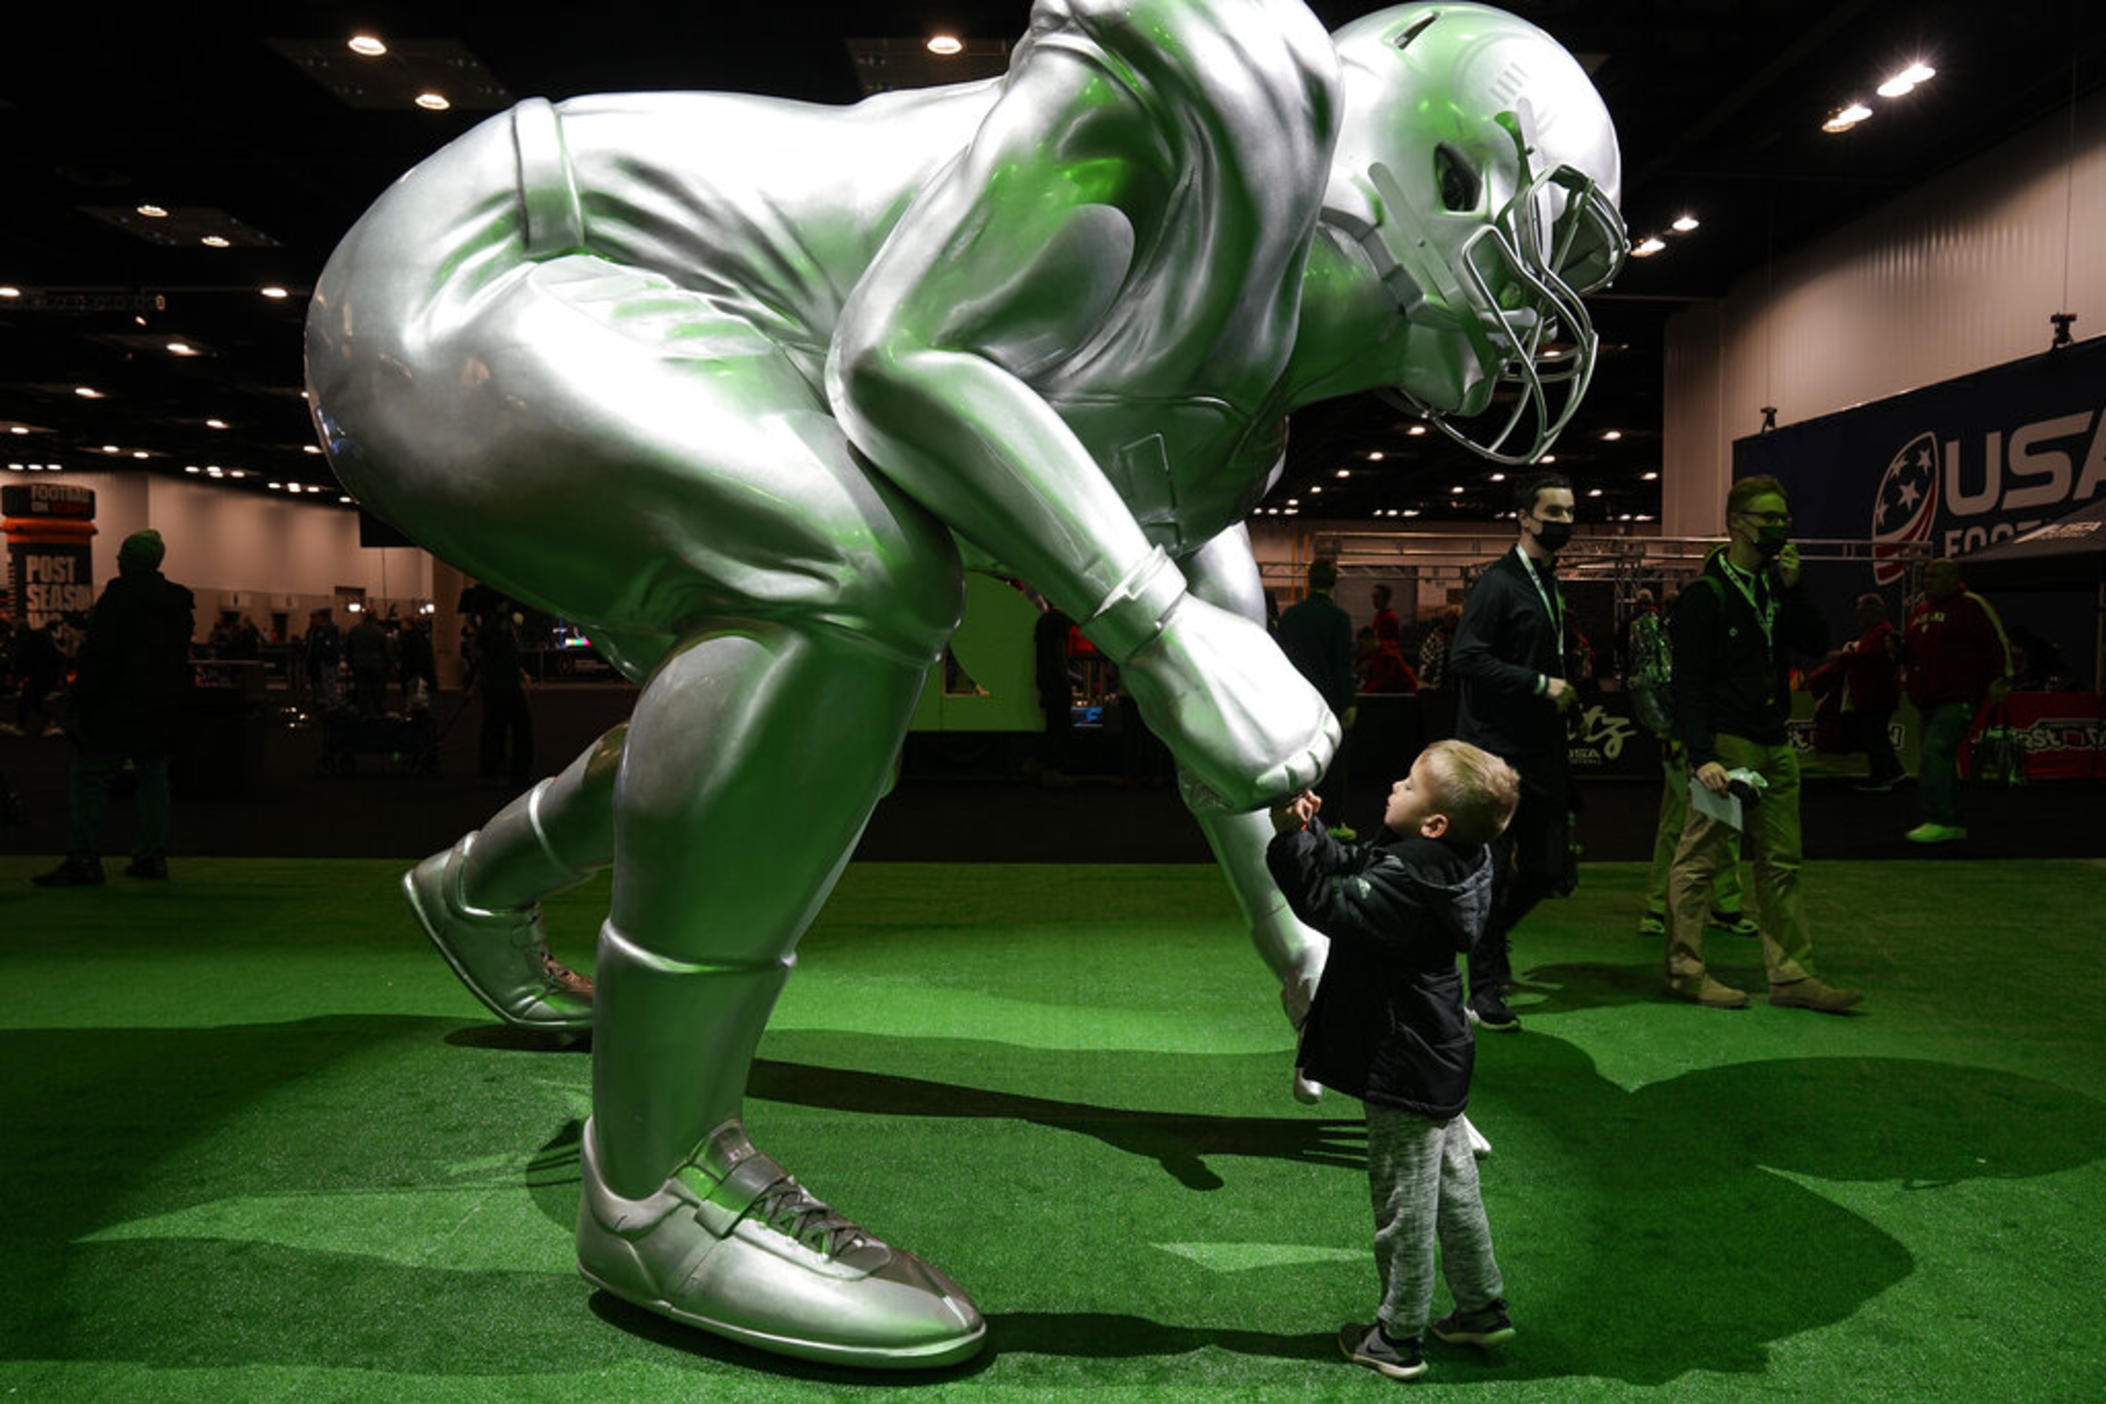 A child fist bumps a statue in Indianapolis, Saturday, Jan. 8, 2022. Alabama plays Georgia in the NCAA college football championship game on Monday.